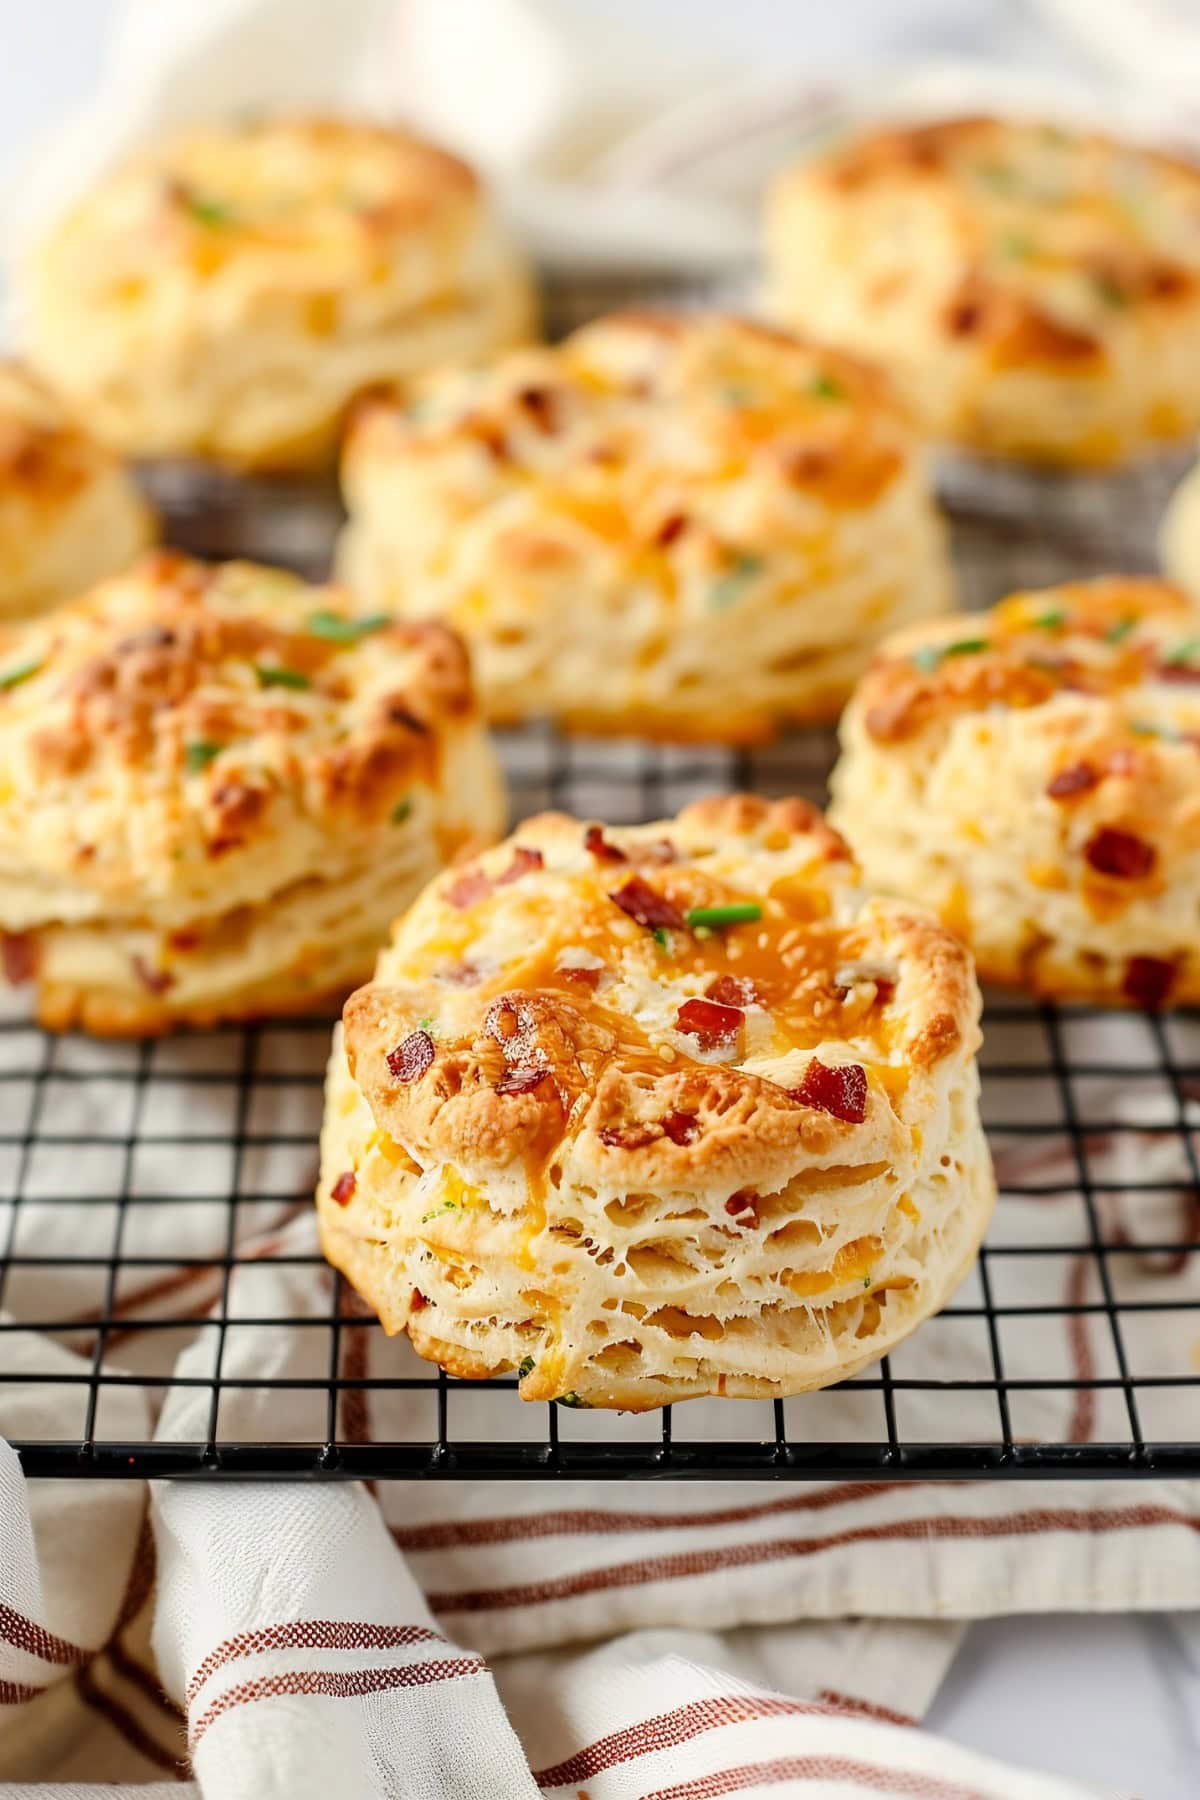 Bacon cheddar biscuits, featuring chives for extra flavor